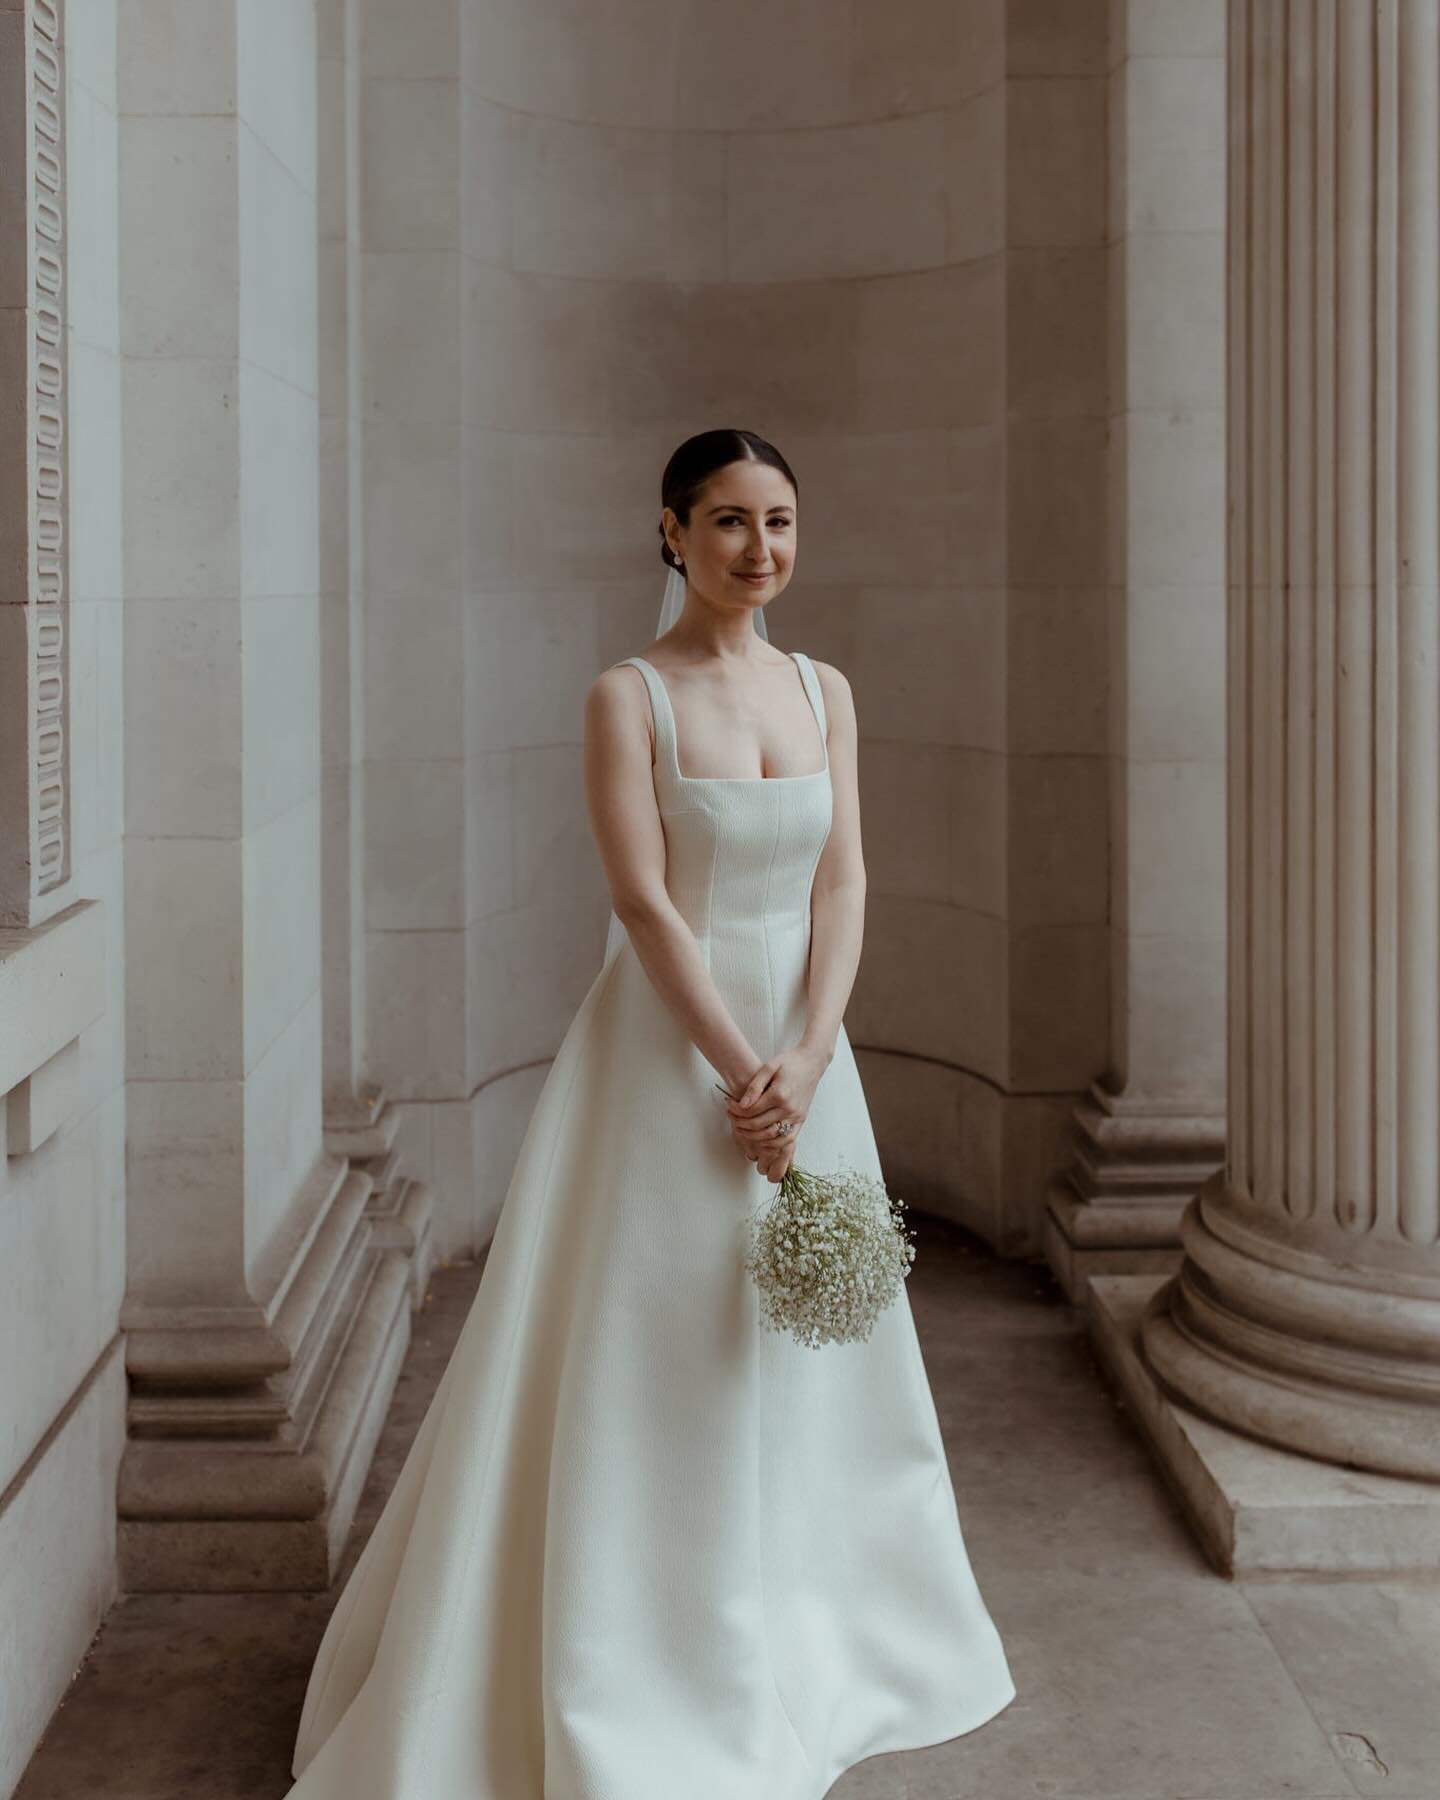 // London Weddings //
⠀⠀⠀⠀⠀⠀⠀⠀⠀
I am all for timeless elegance and Roxanna&rsquo;s hair and makeup truly encapsulated every aspect of timeless. 
⠀⠀⠀⠀⠀⠀⠀⠀⠀
Roxanna and I actually weren&rsquo;t able meet prior to hair wedding day for a hair and makeup 